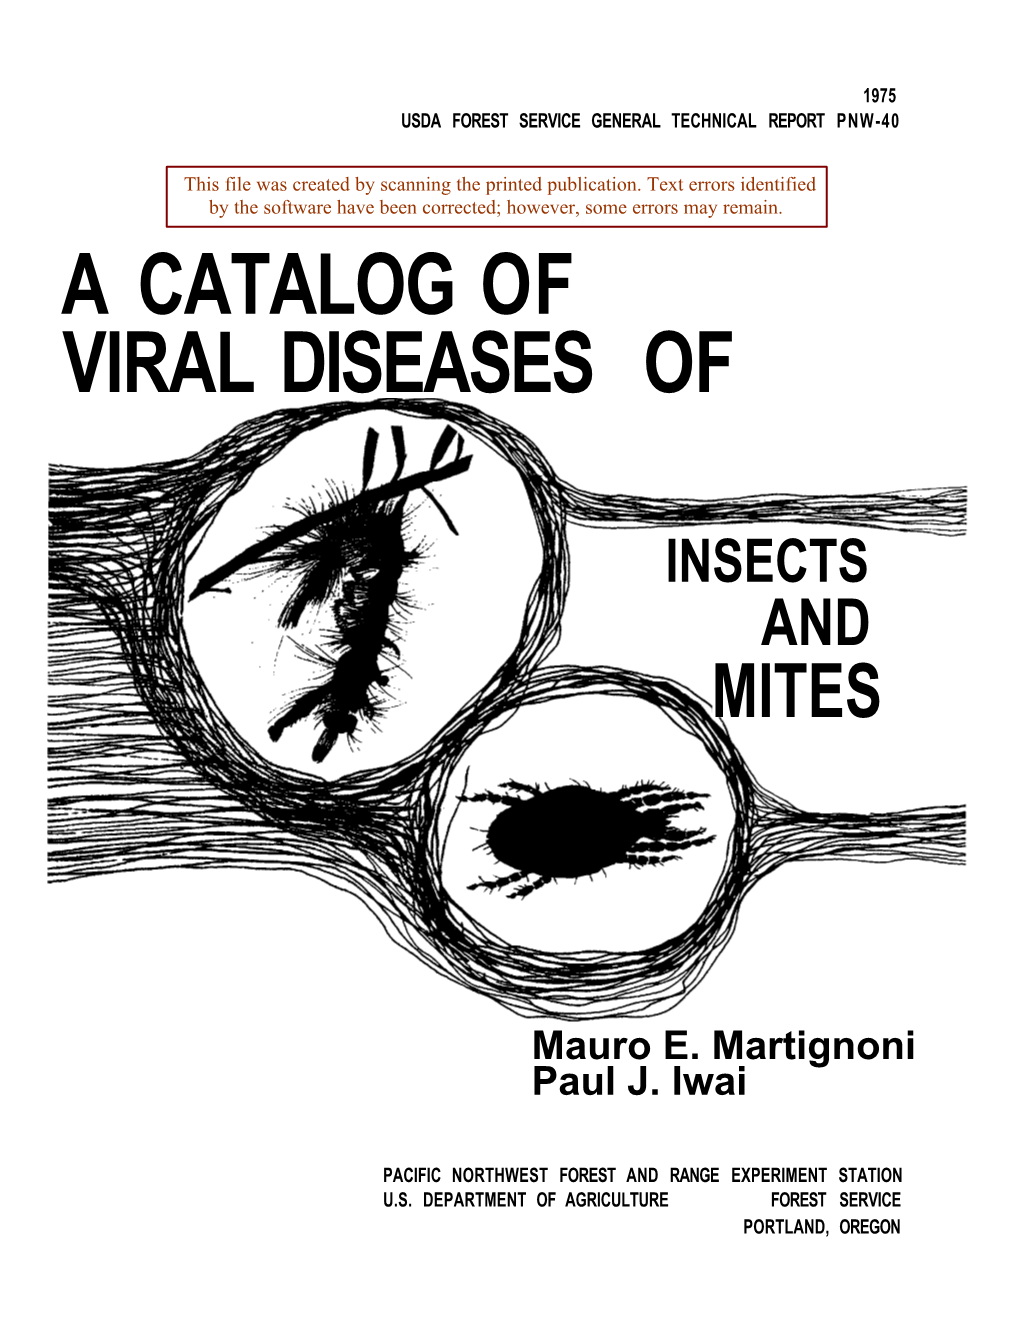 A Catalog of Viral Diseases Of